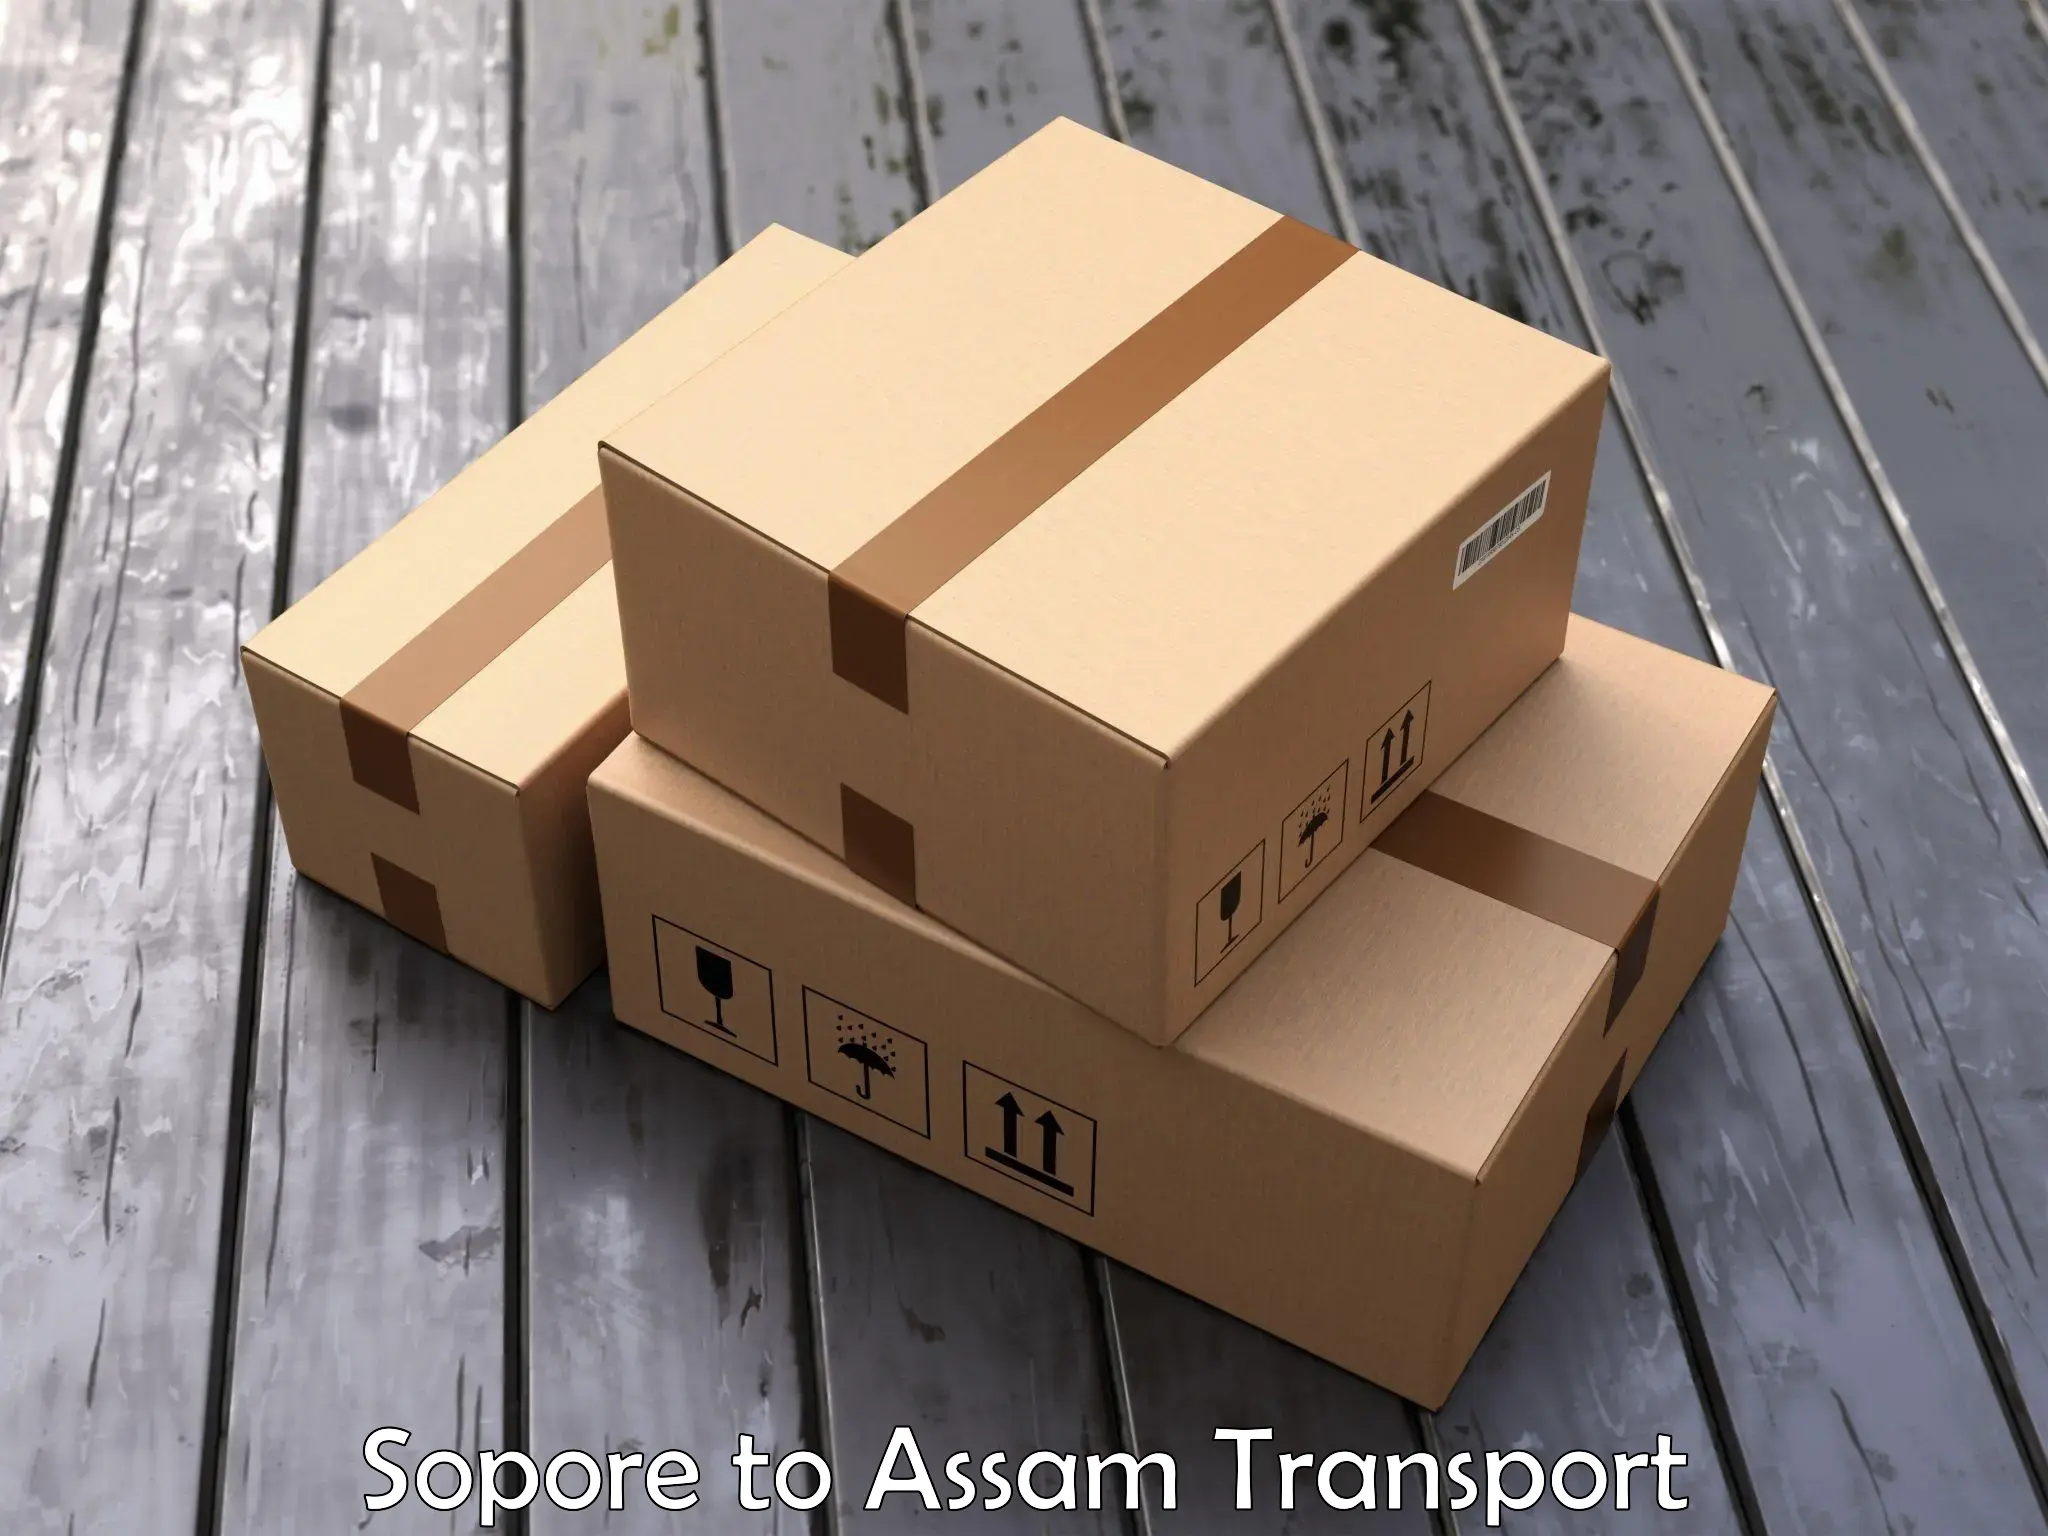 Commercial transport service Sopore to Assam